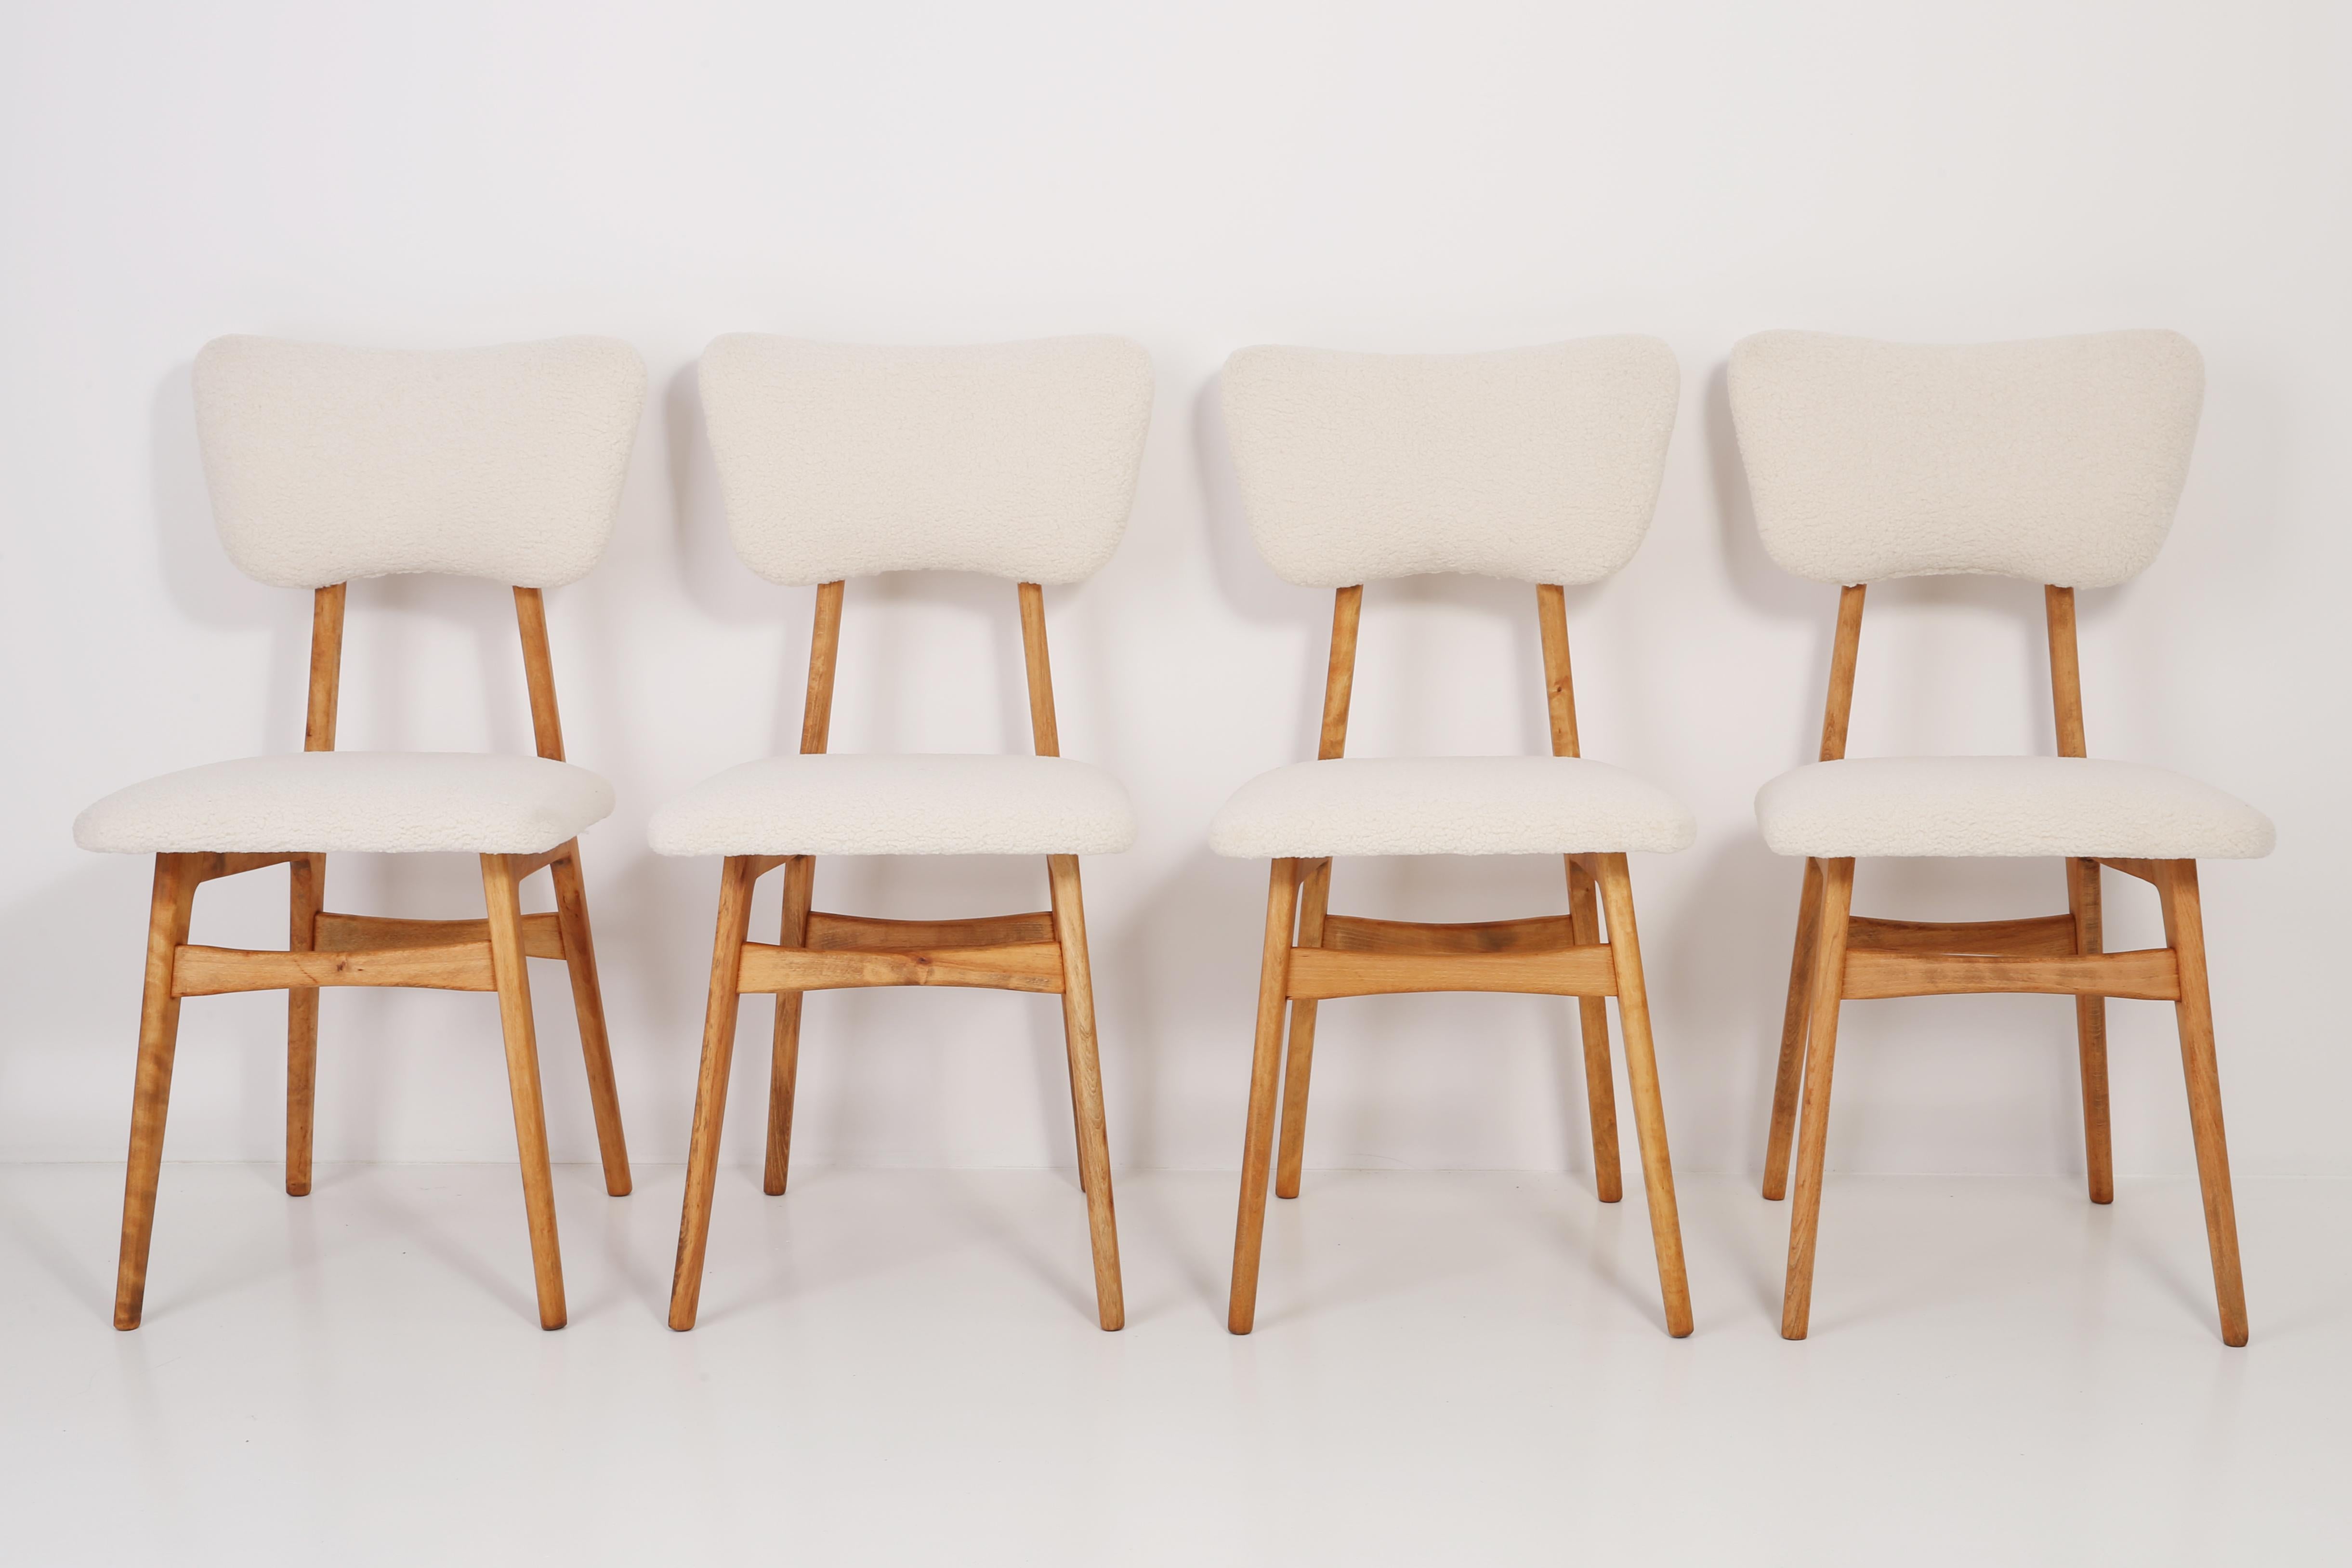 Chairs designed by Prof. Rajmund Halas. Made of beechwood. Chair is after a complete upholstery renovation, the woodwork has been refreshed. Seat and back is dressed in crème, durable and pleasant to the touch boucle fabric. Chair is stable and very